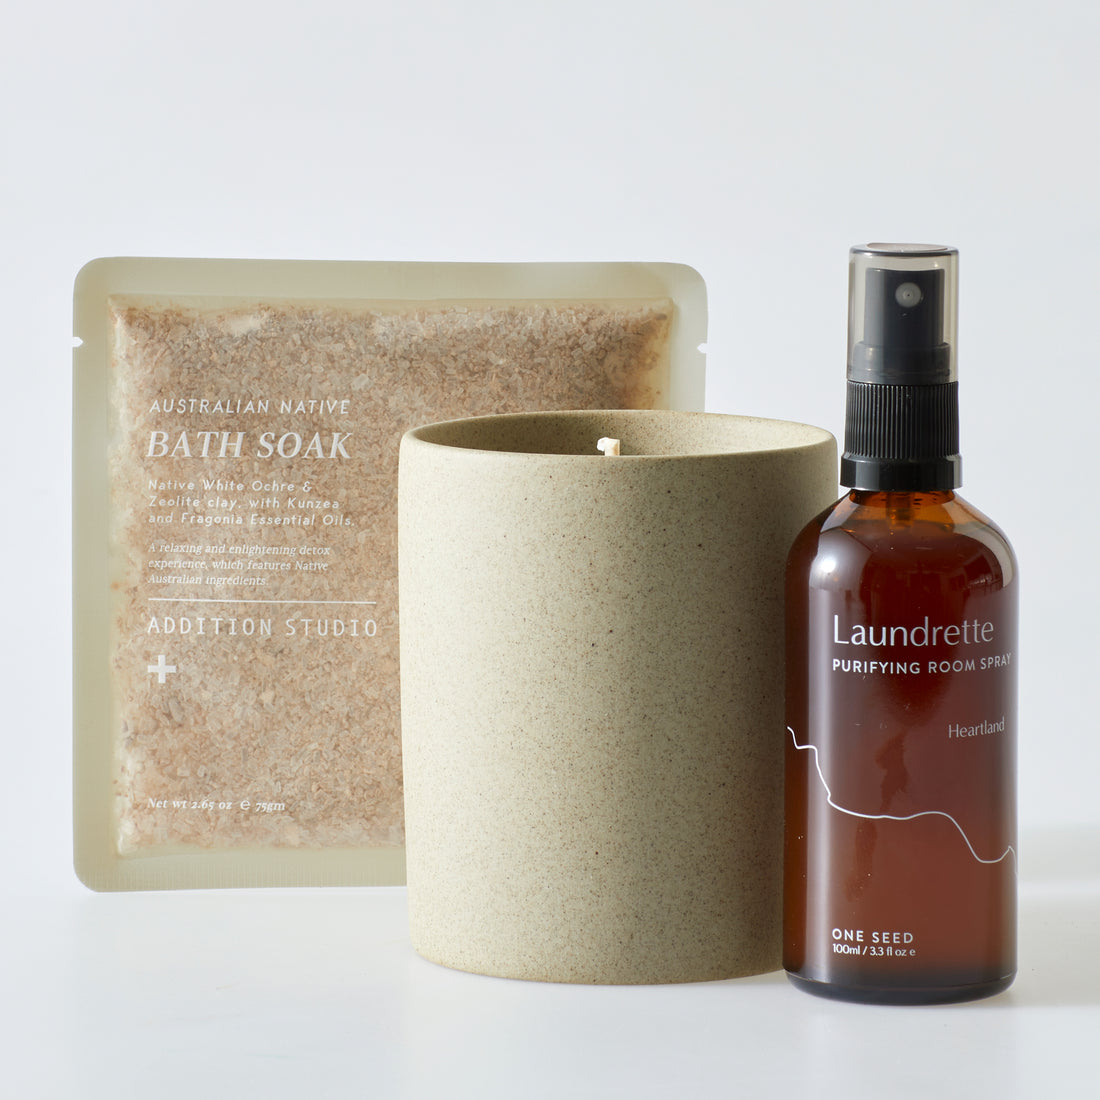 Home Harmony 3 Gift Set is crafted to help purify the air in your favourite spaces, while creating a soothing ambience.  PRODUCTS INCLUDED: ・Addition Studio Australian Native Bath Soak Sachet, 75gm ・Addition Studio Sunflower Galaxy Scented Candle, 285gm ・One Seed Heartland Purifying Room Spray, 100ml